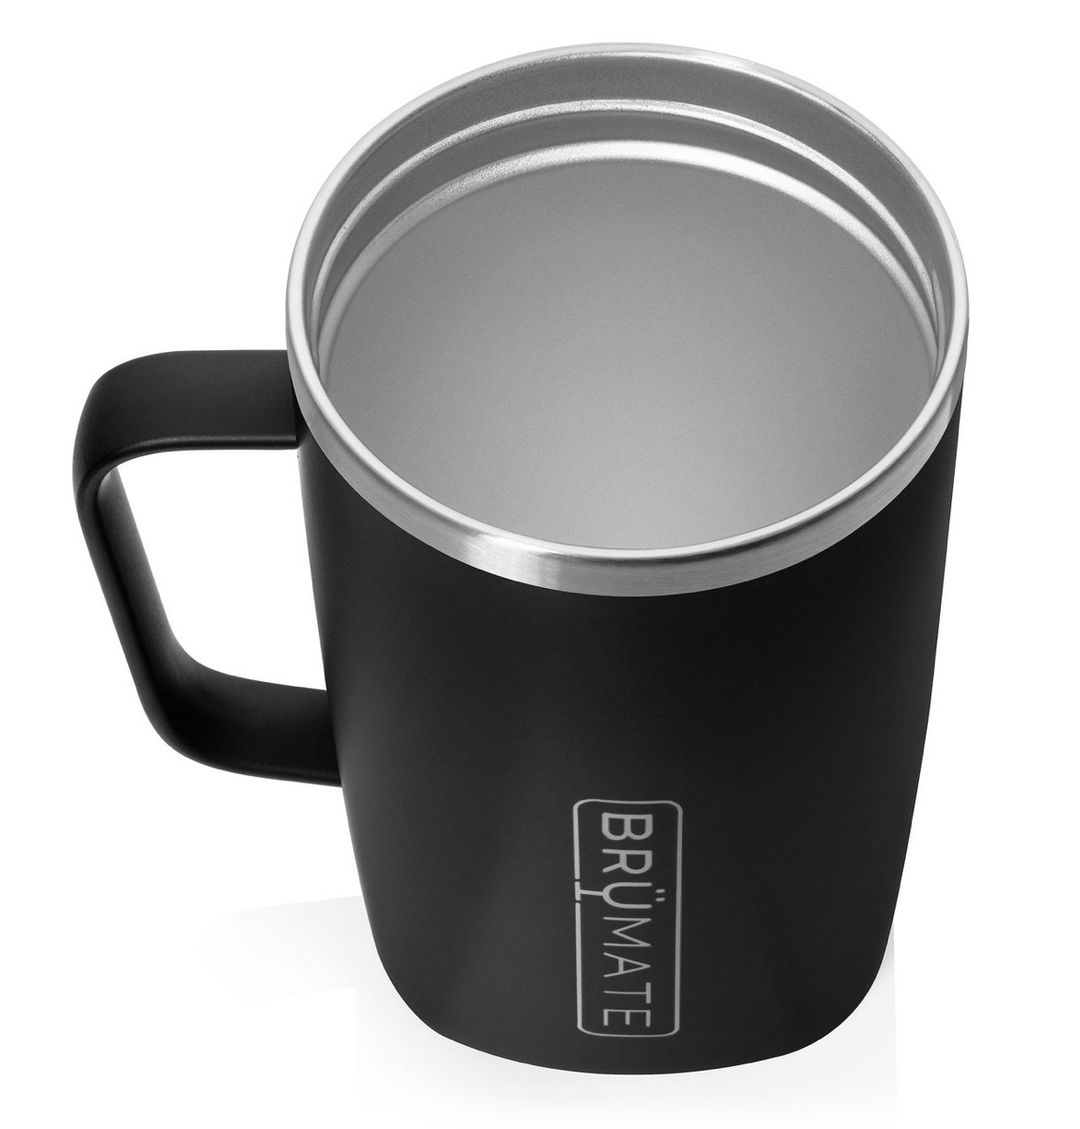 BrüMate Toddy - 16oz 100% Leak Proof Insulated Coffee Mug with